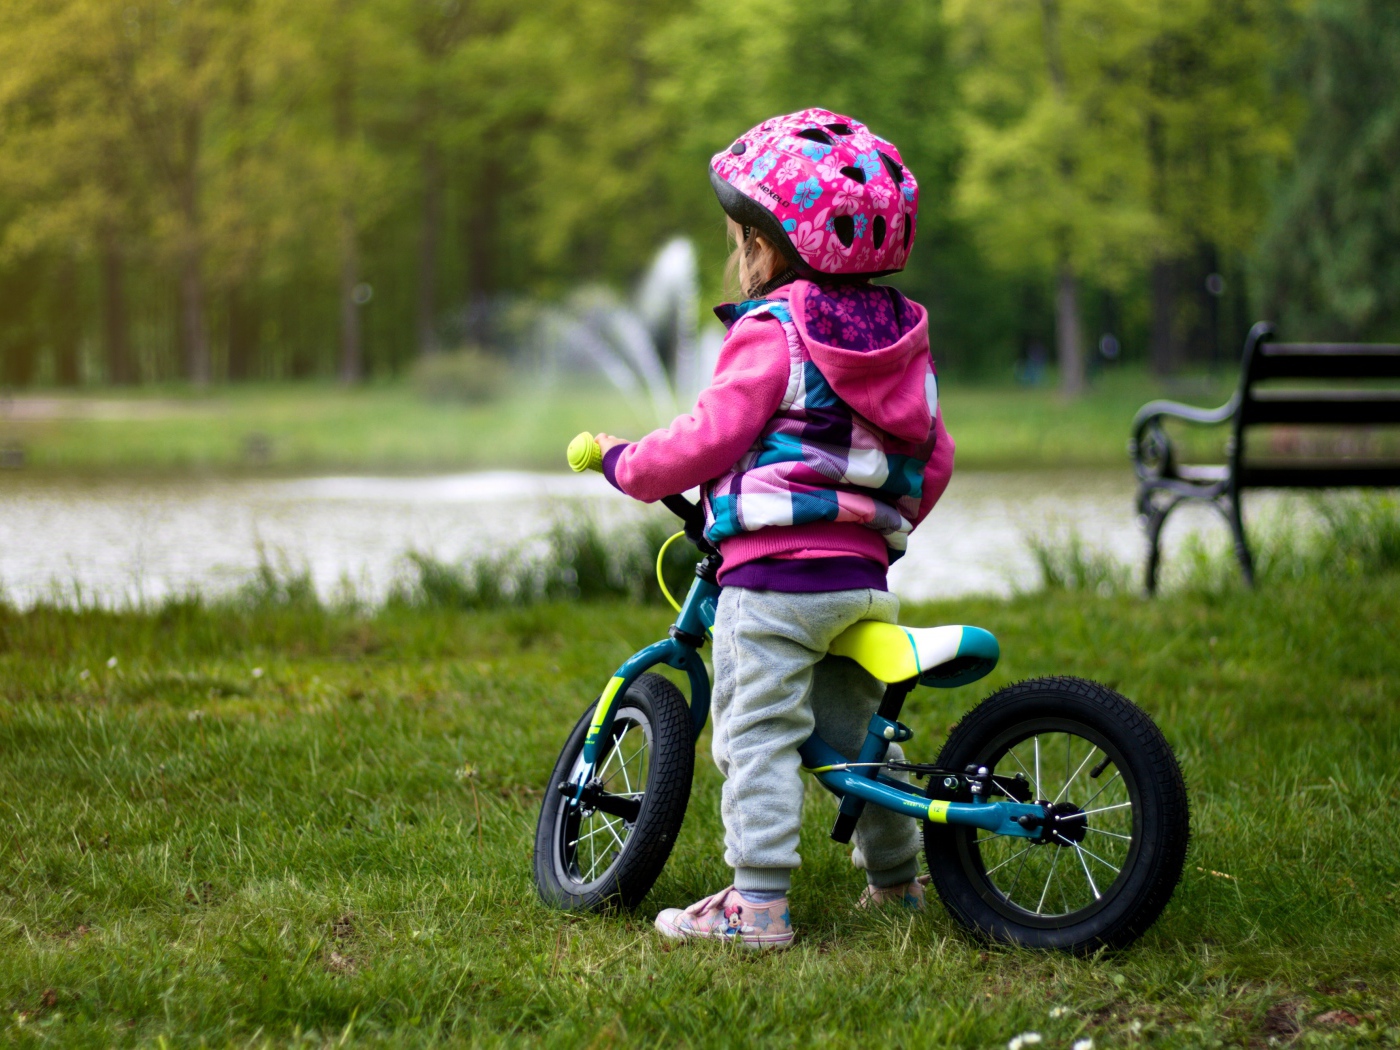 Little girl on a bicycle in the park